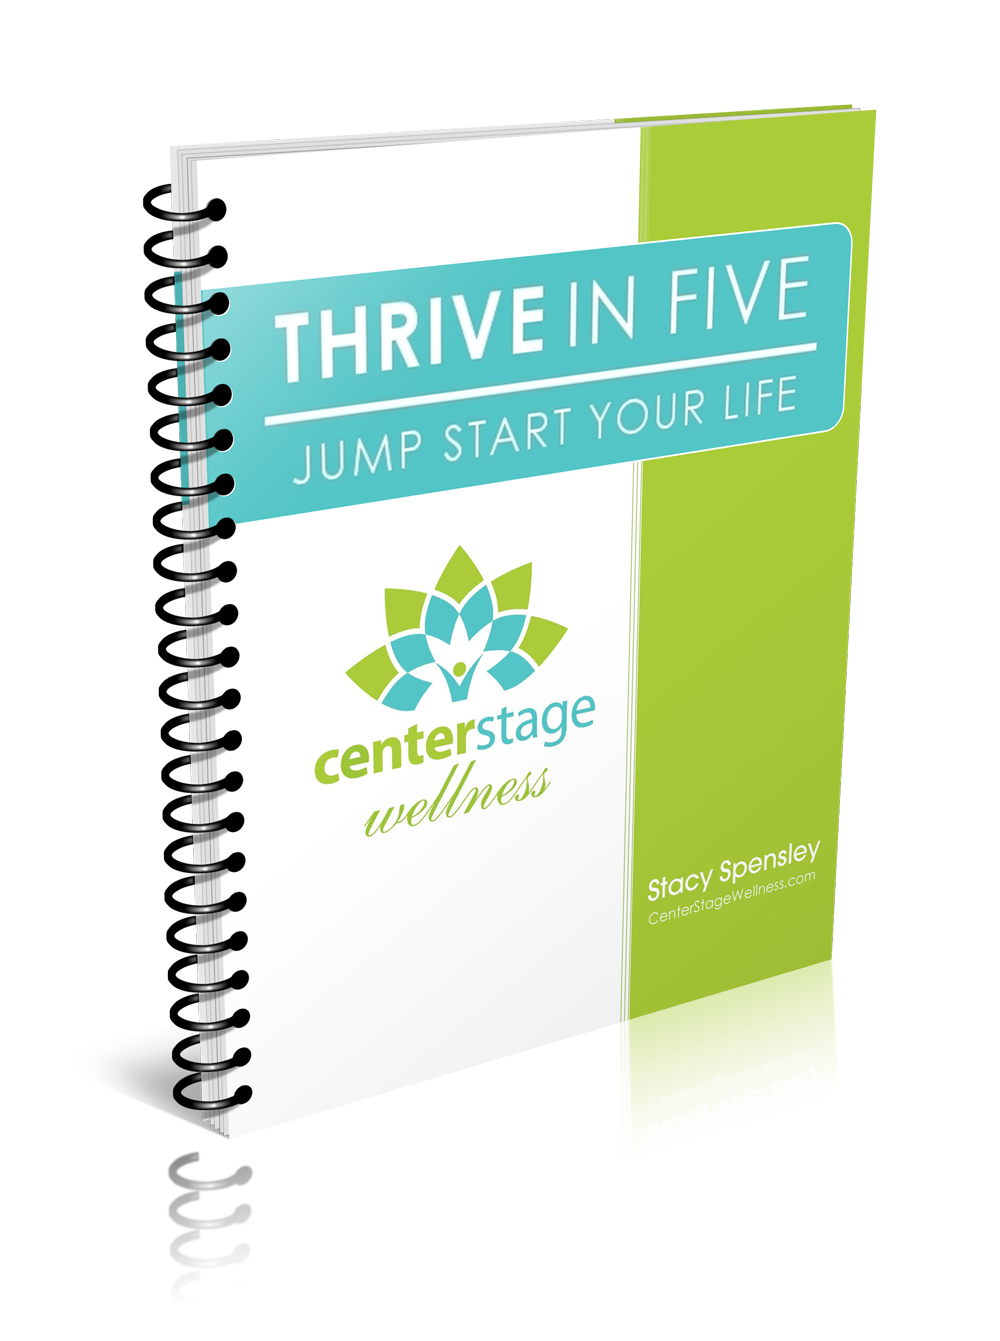 Thrive in Five!